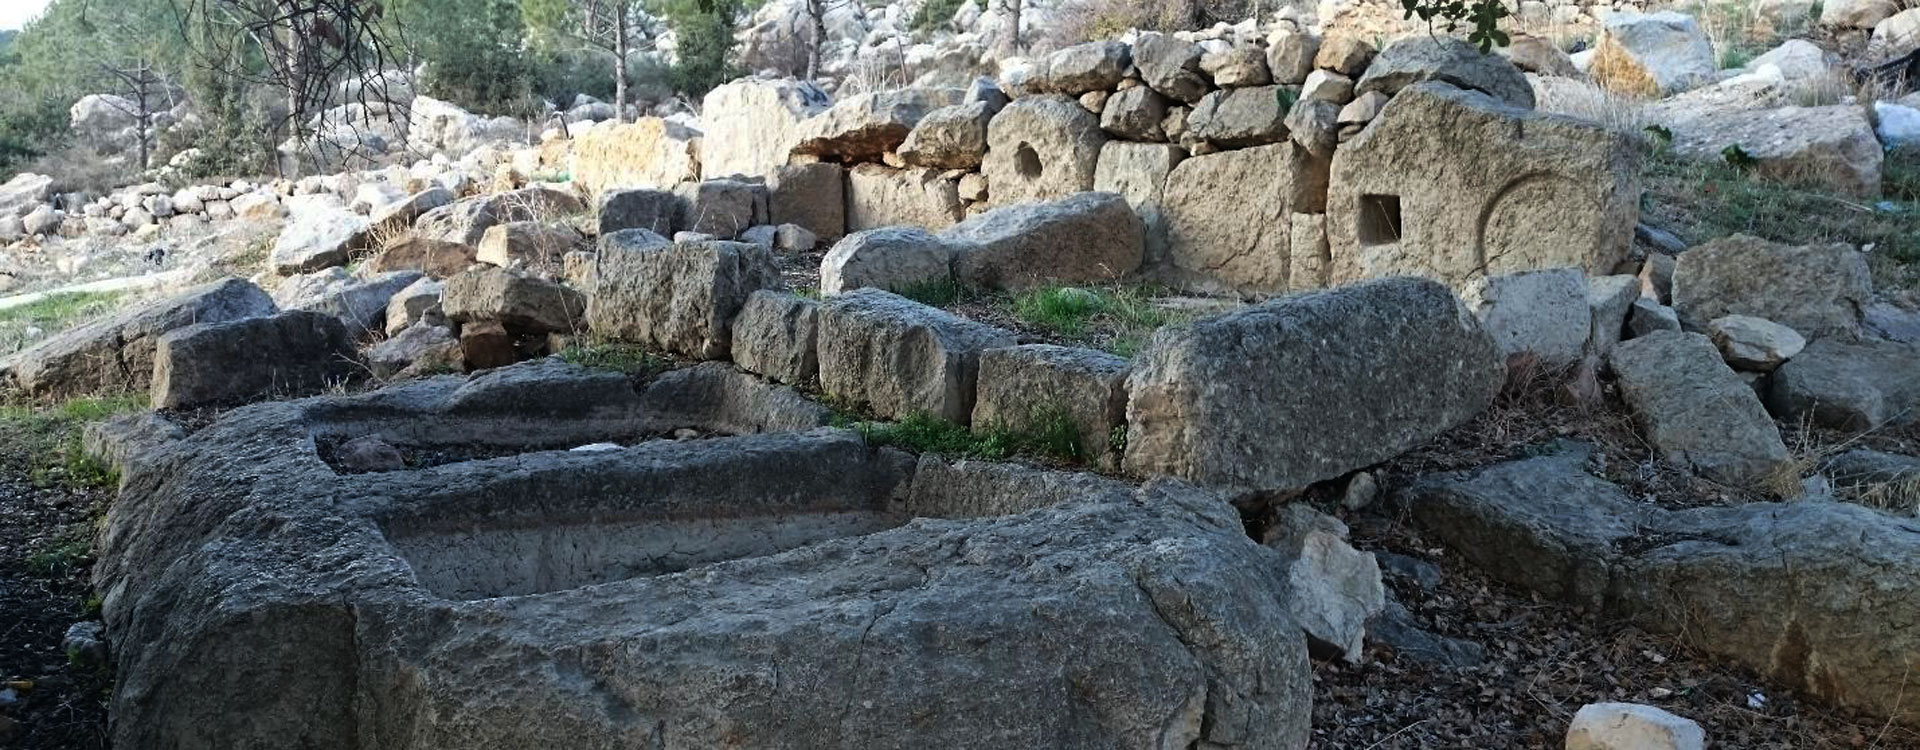 Cultural heritage along the Lebanon Mountain Trail – The Oil Press of Khalwat